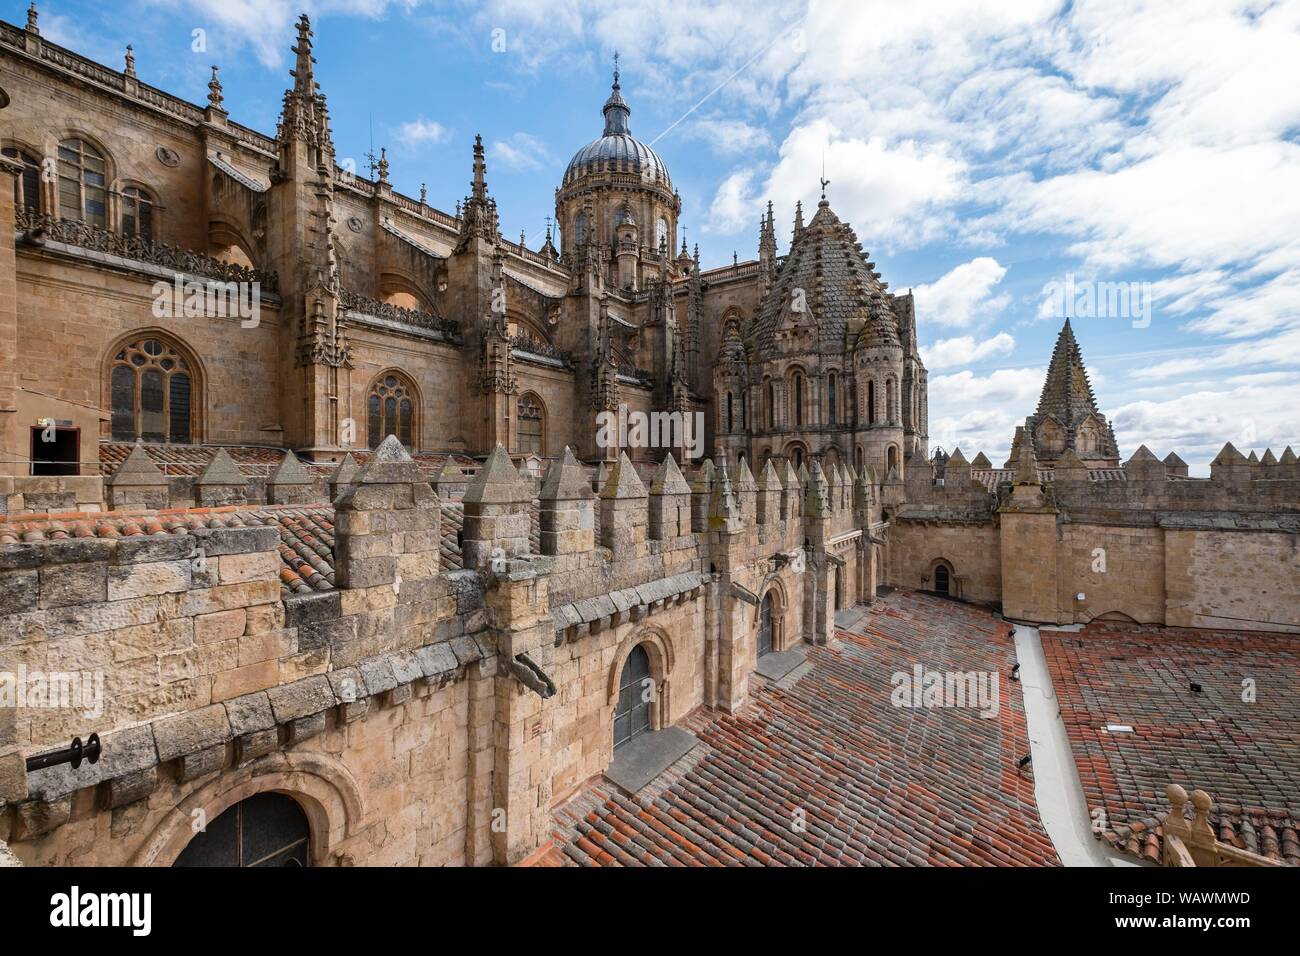 Gothic Old Cathedral, Catedral Vieja, exterior view, Salamanca, Castile-Leon, Spain Stock Photo